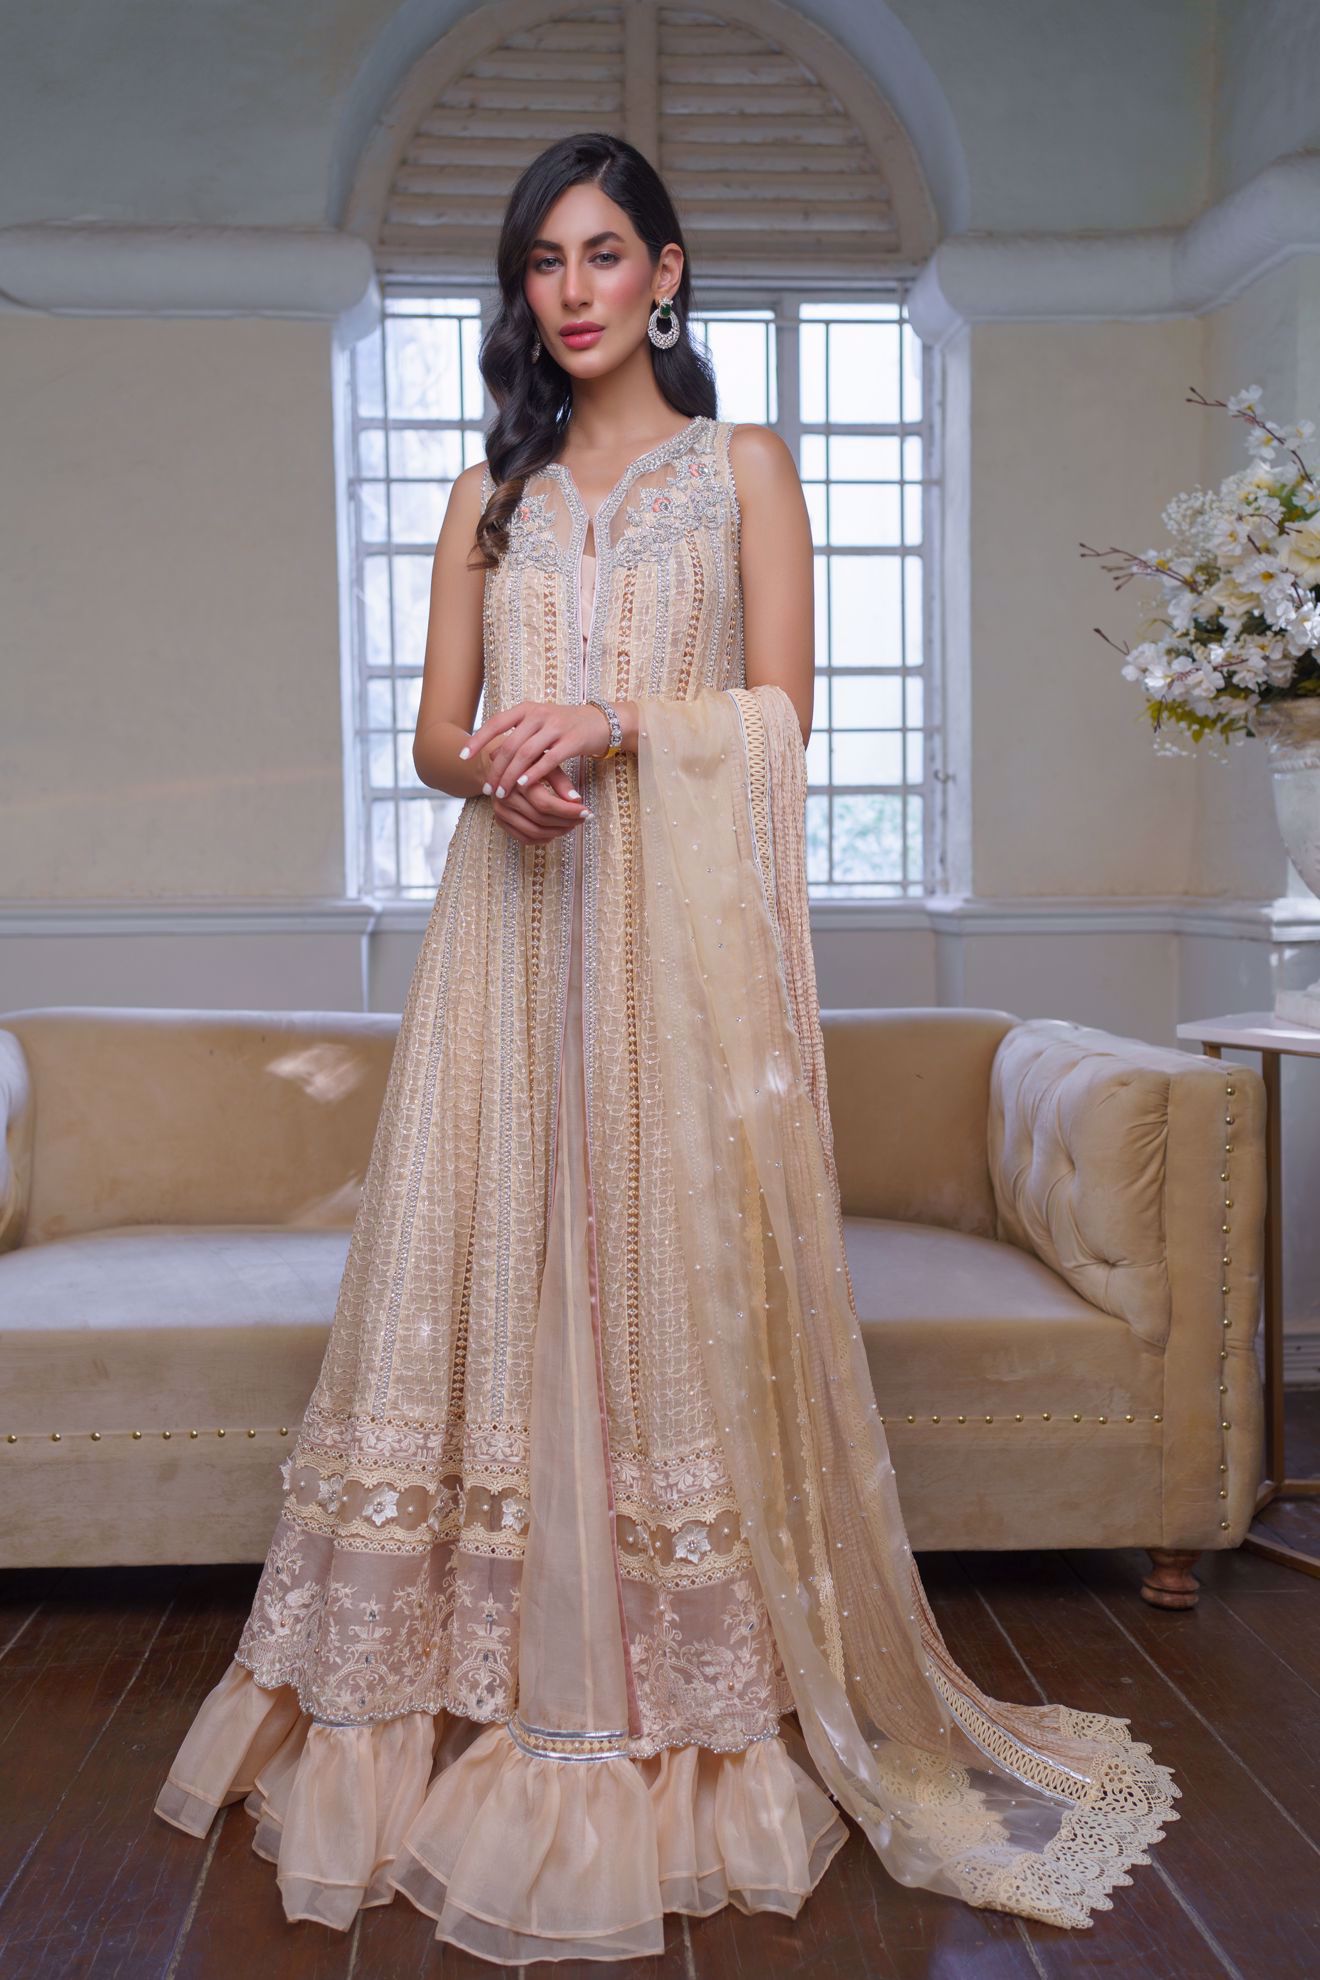 Picture of Maaysa, Peach Champagne front open Chikankari Kalidaar